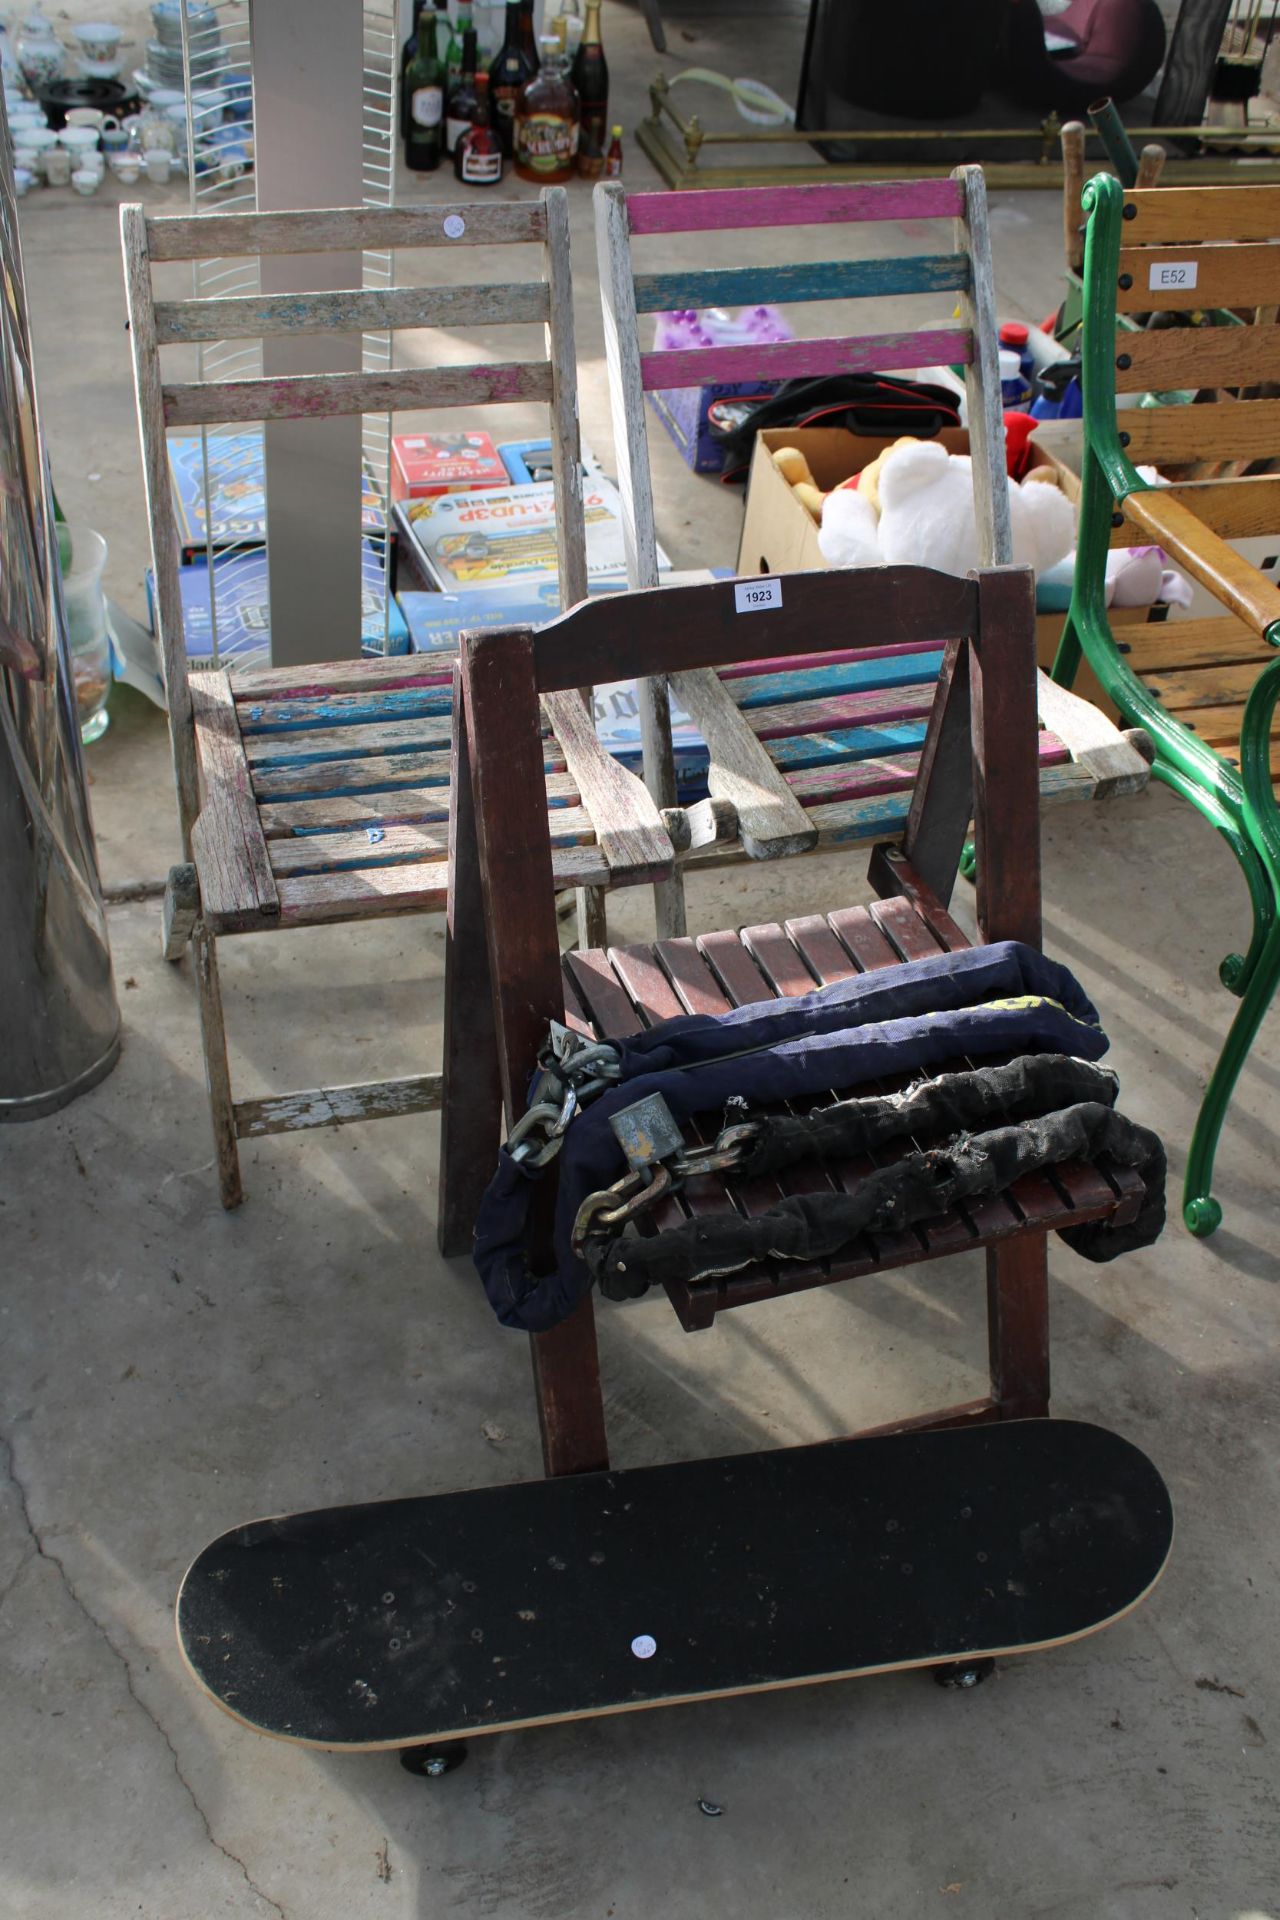 THREE WOODEN FOLDING CHAIRS, A SKATEBOARD AND TWO CHAINS AND PADLOCKS ETC